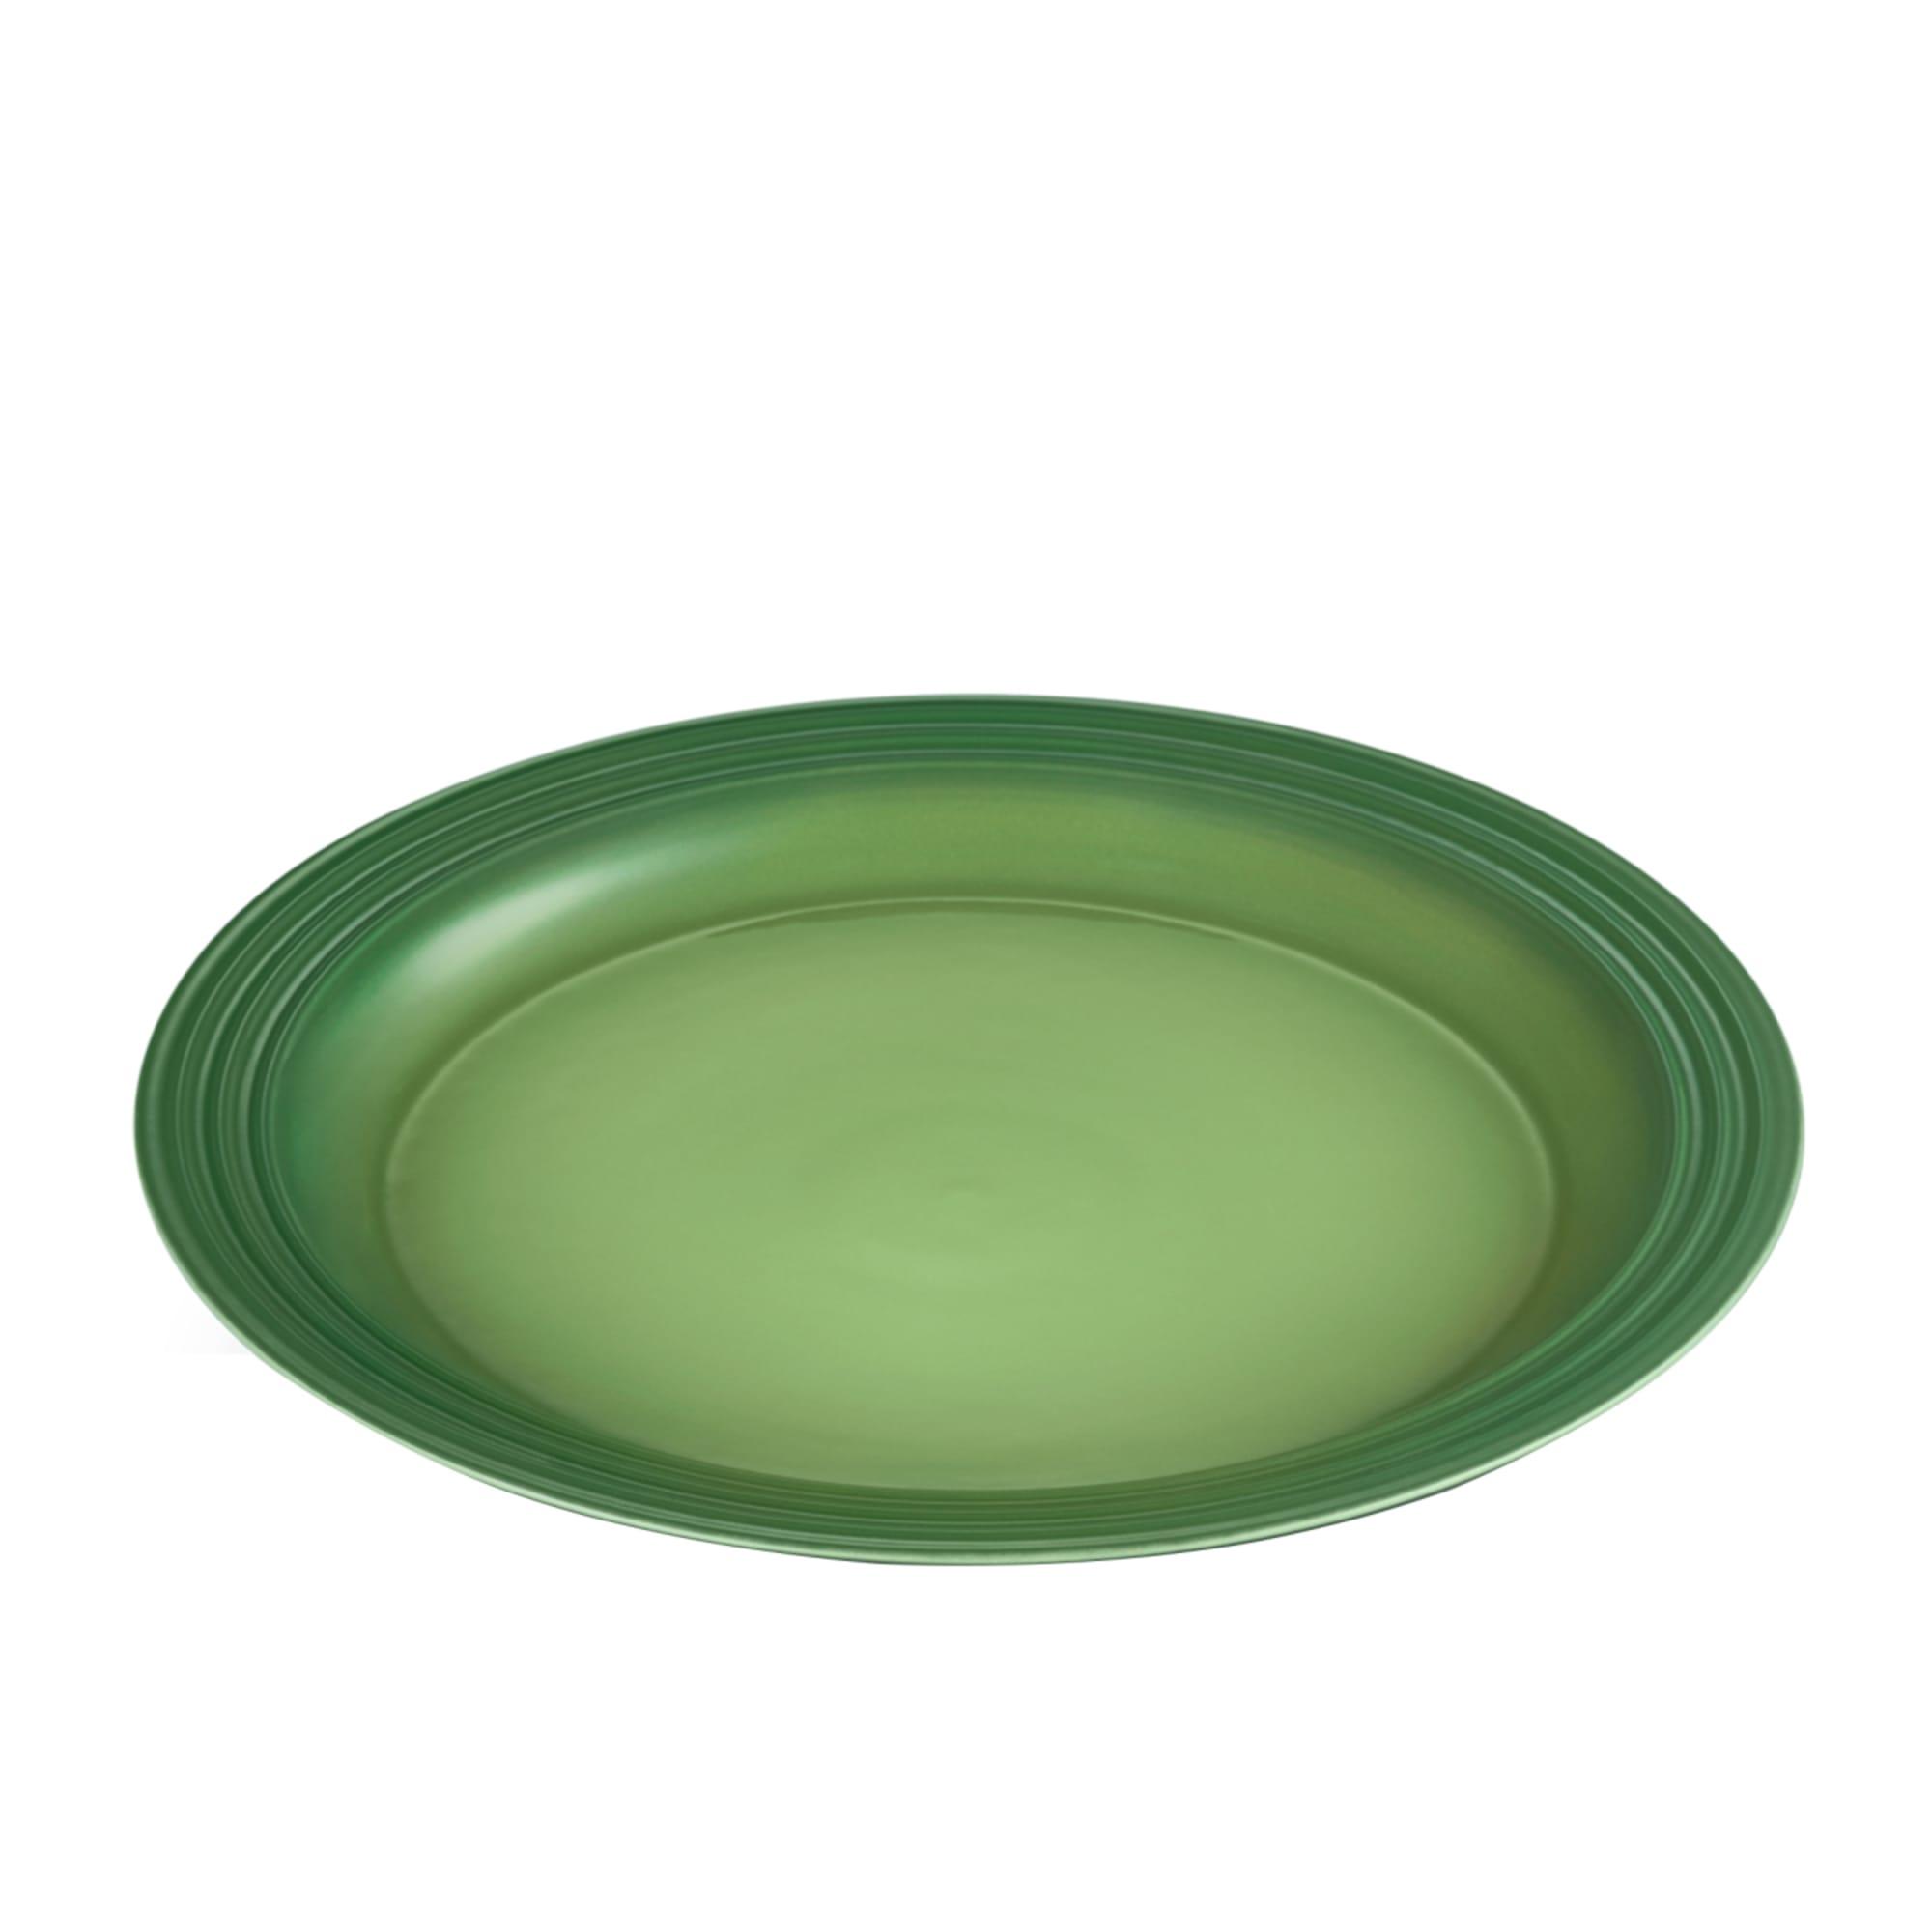 Le Creuset Stoneware Dinner Plate 27cm Bamboo Green Image 2